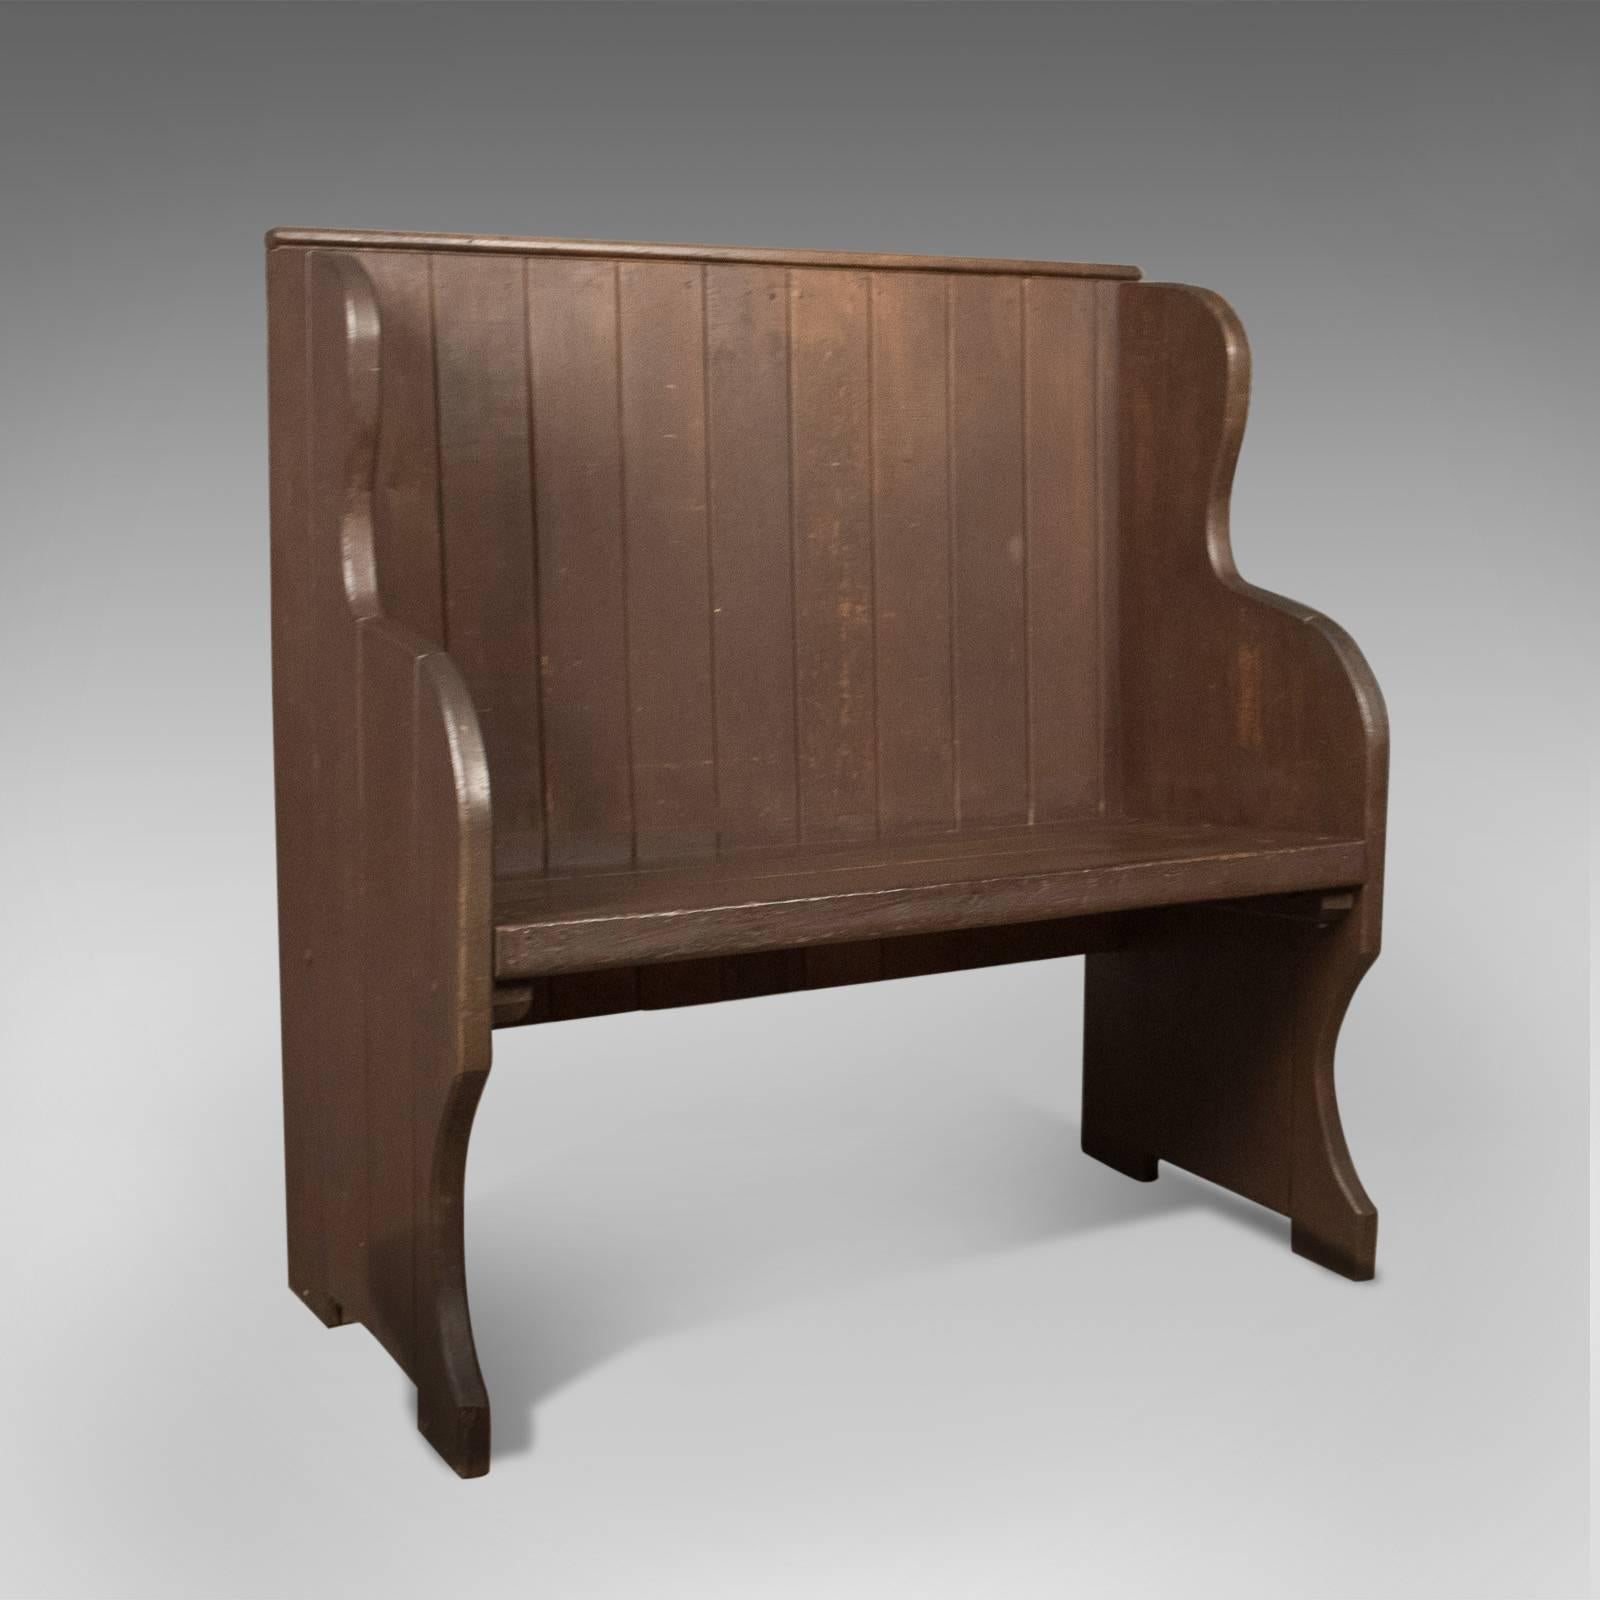 This is an antique settle, a 19th century bench or pew, English, circa 1890.

Solid teak plank construction with a waxed finish
Tongue and groove boards with deep winged sides to prevent draughts
Stained pine back boards with capping.

Shaped